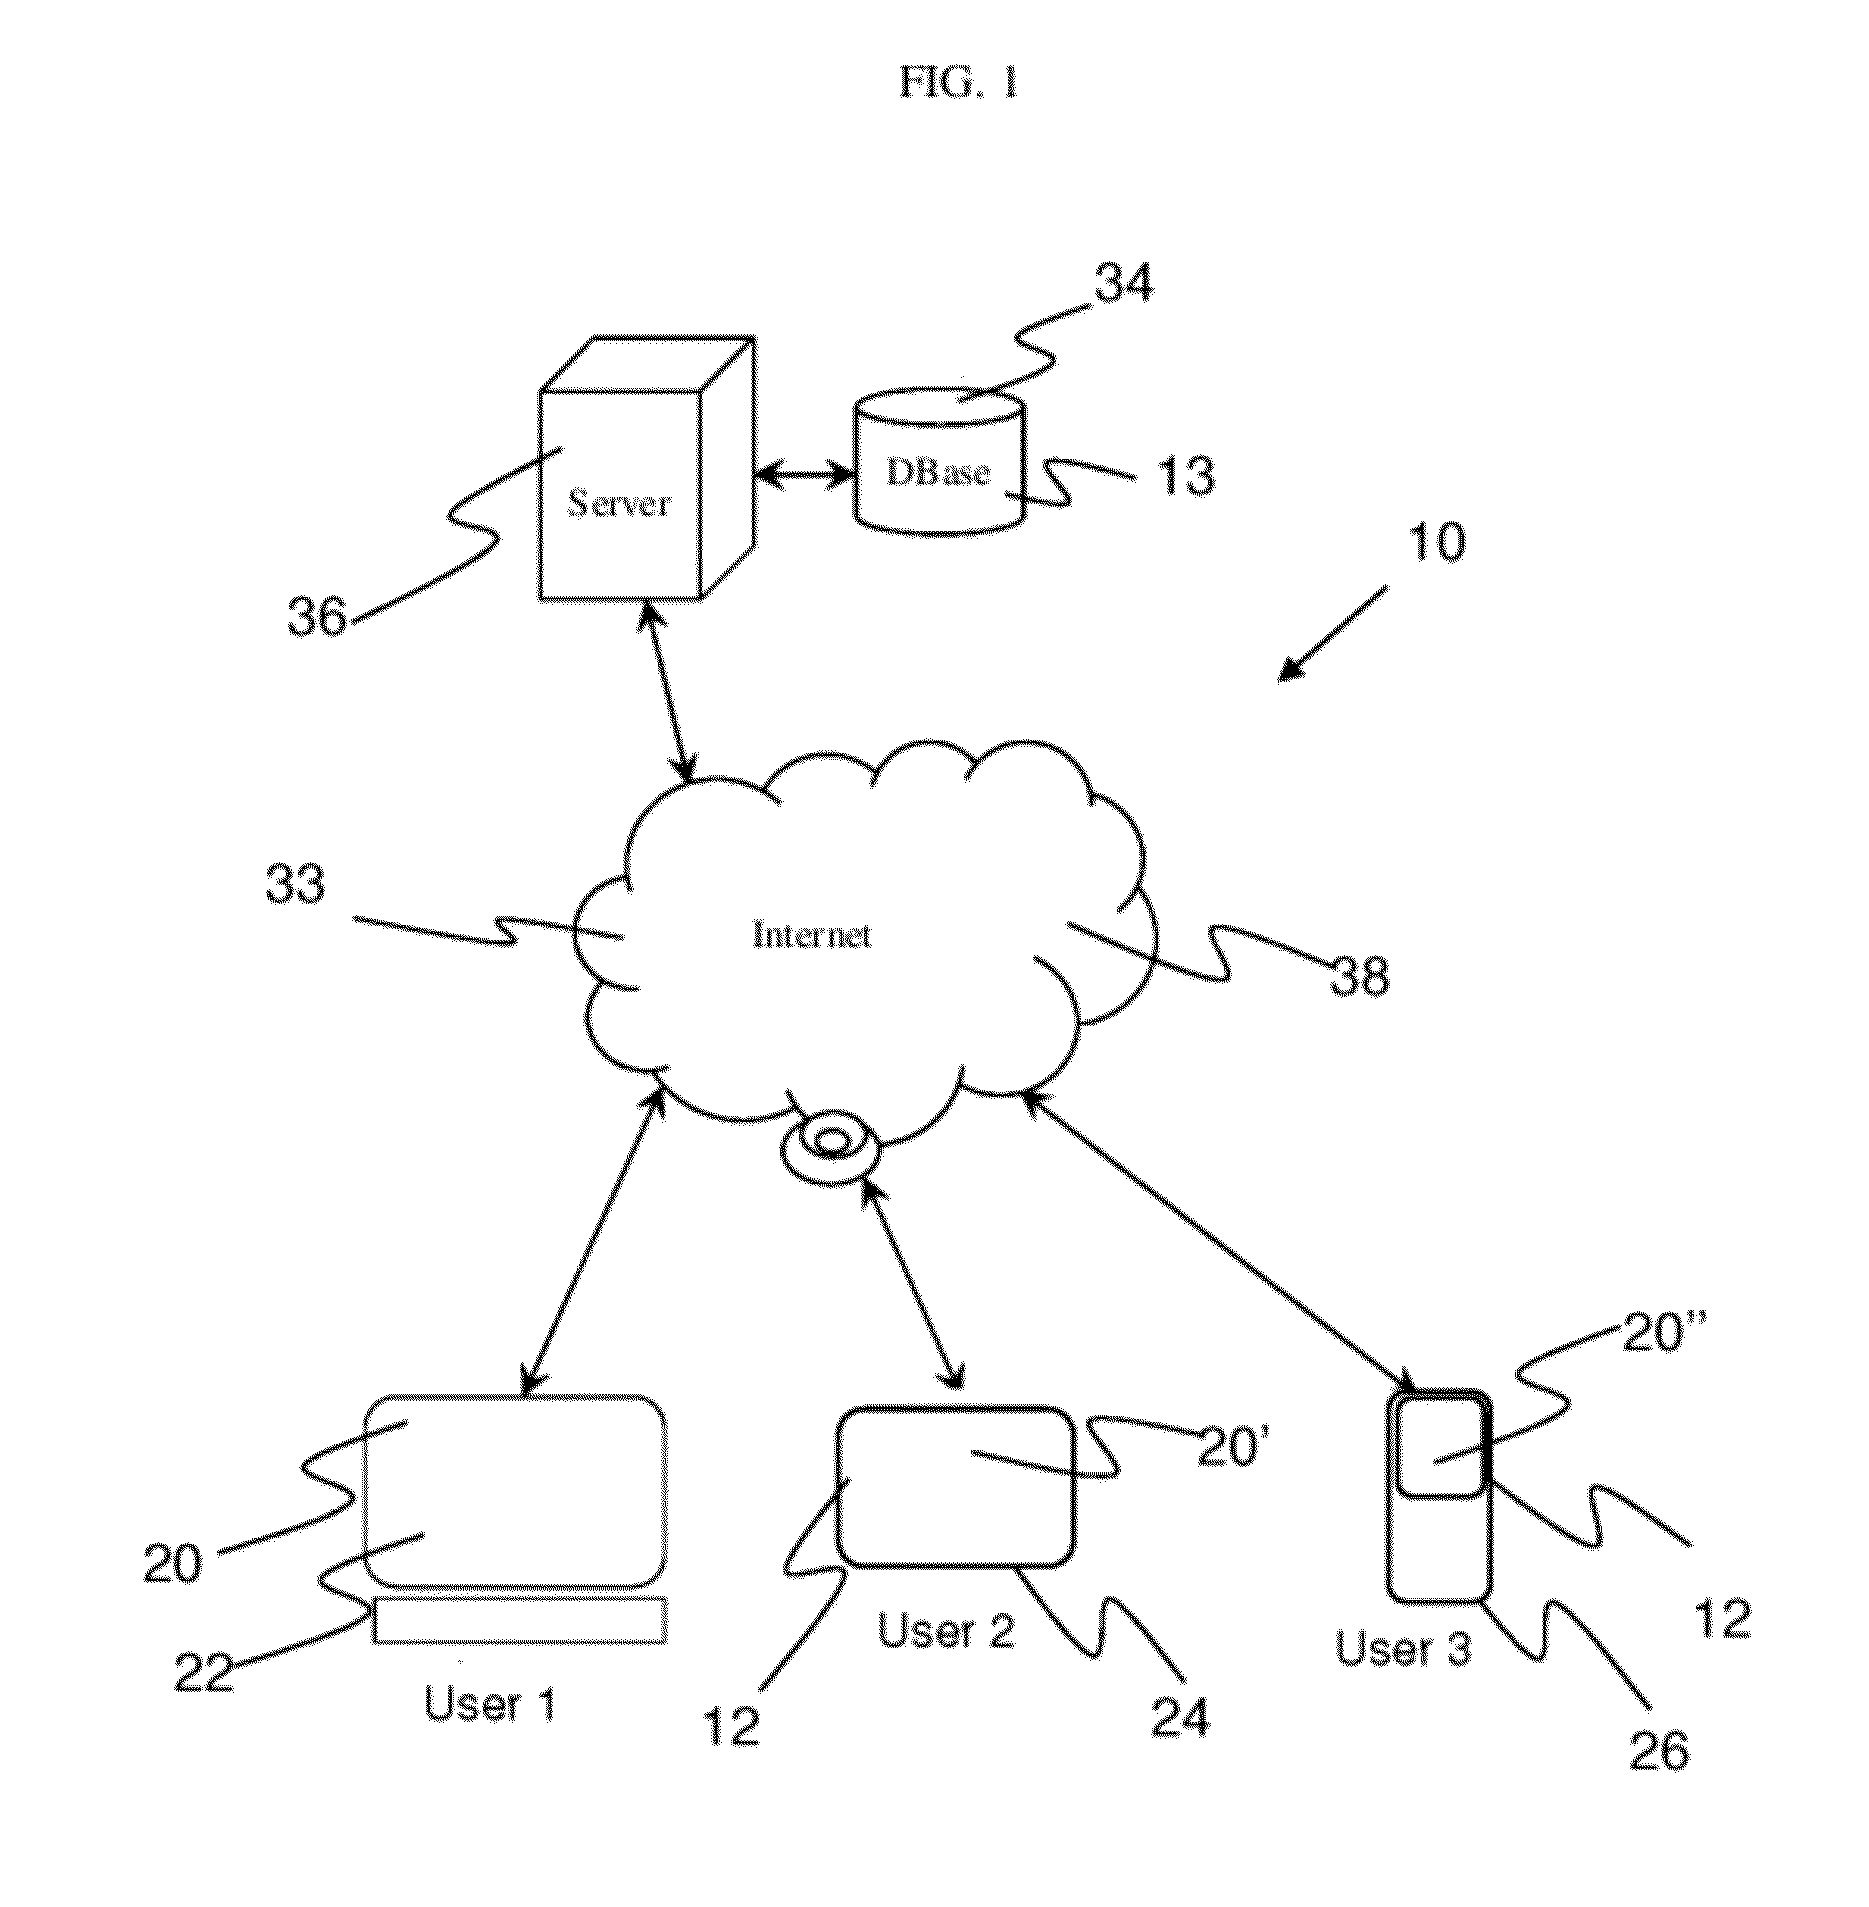 Electronic list priority management system and method of using same